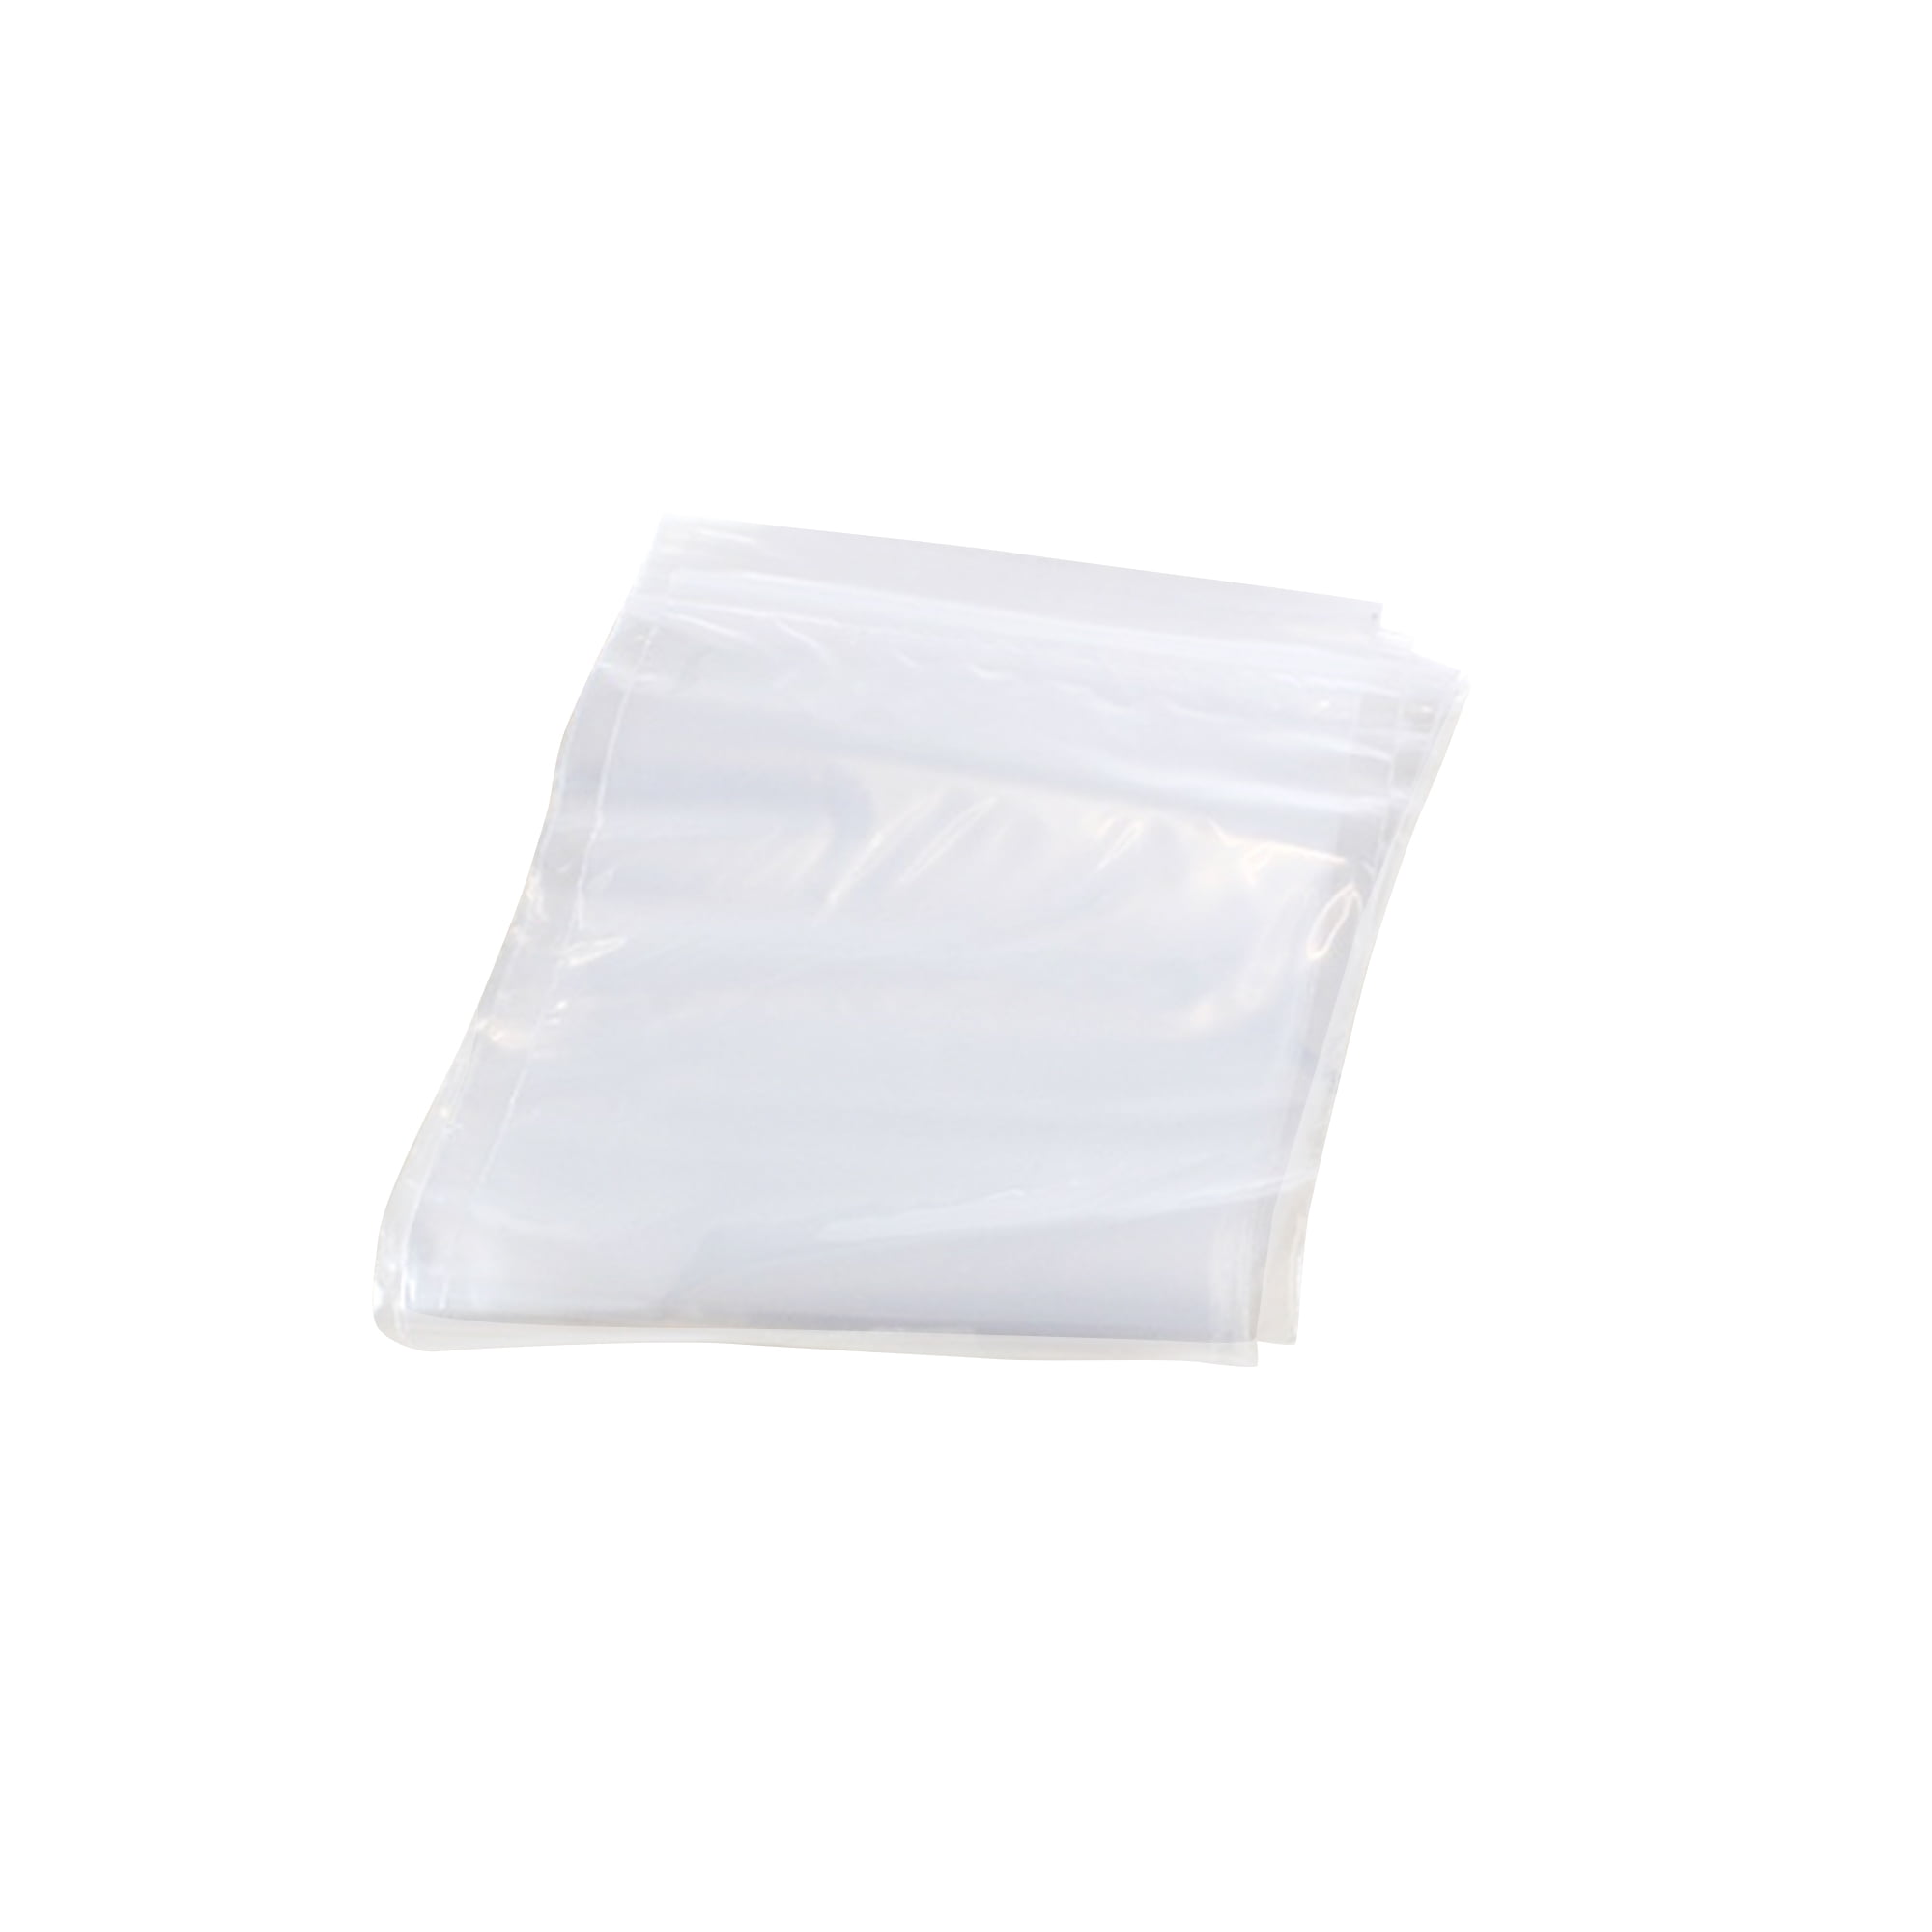 Grip Seal Resealable Clear Plastic bag ALL SIZES IN INCHES One of  Best Quality 